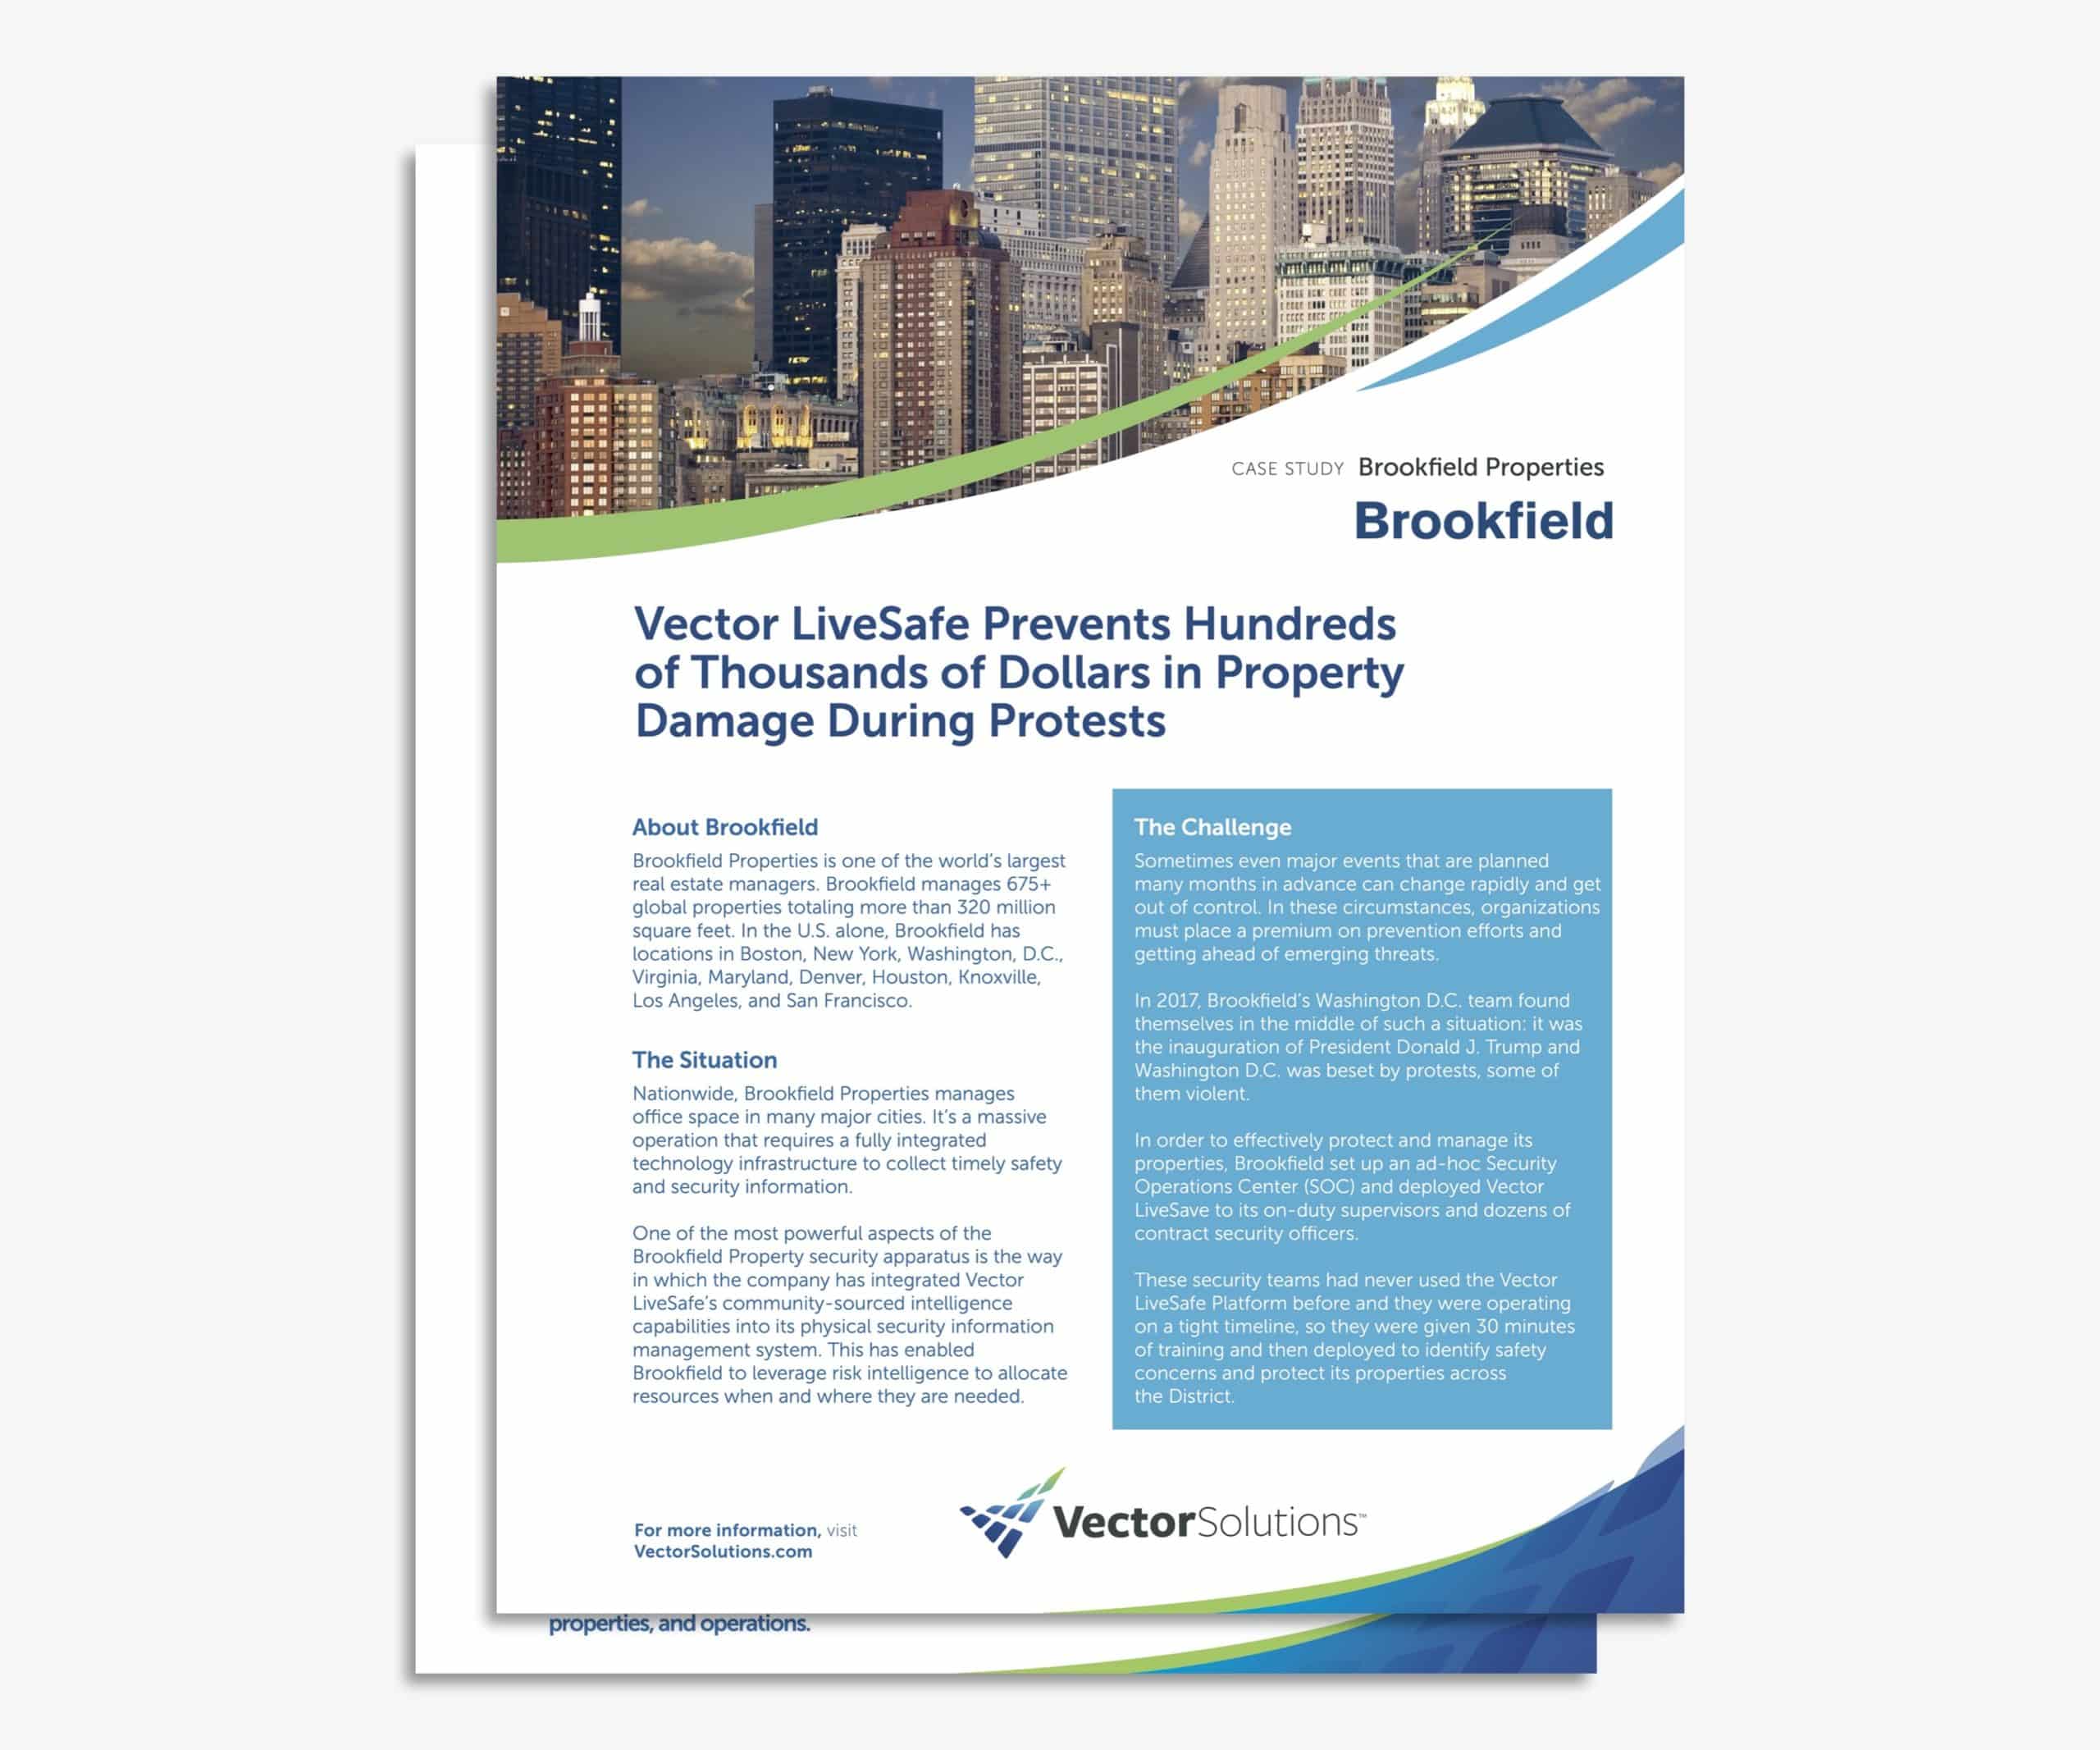 Brookfield Properties Case Study: Preventing Costly Property Damage During Protests